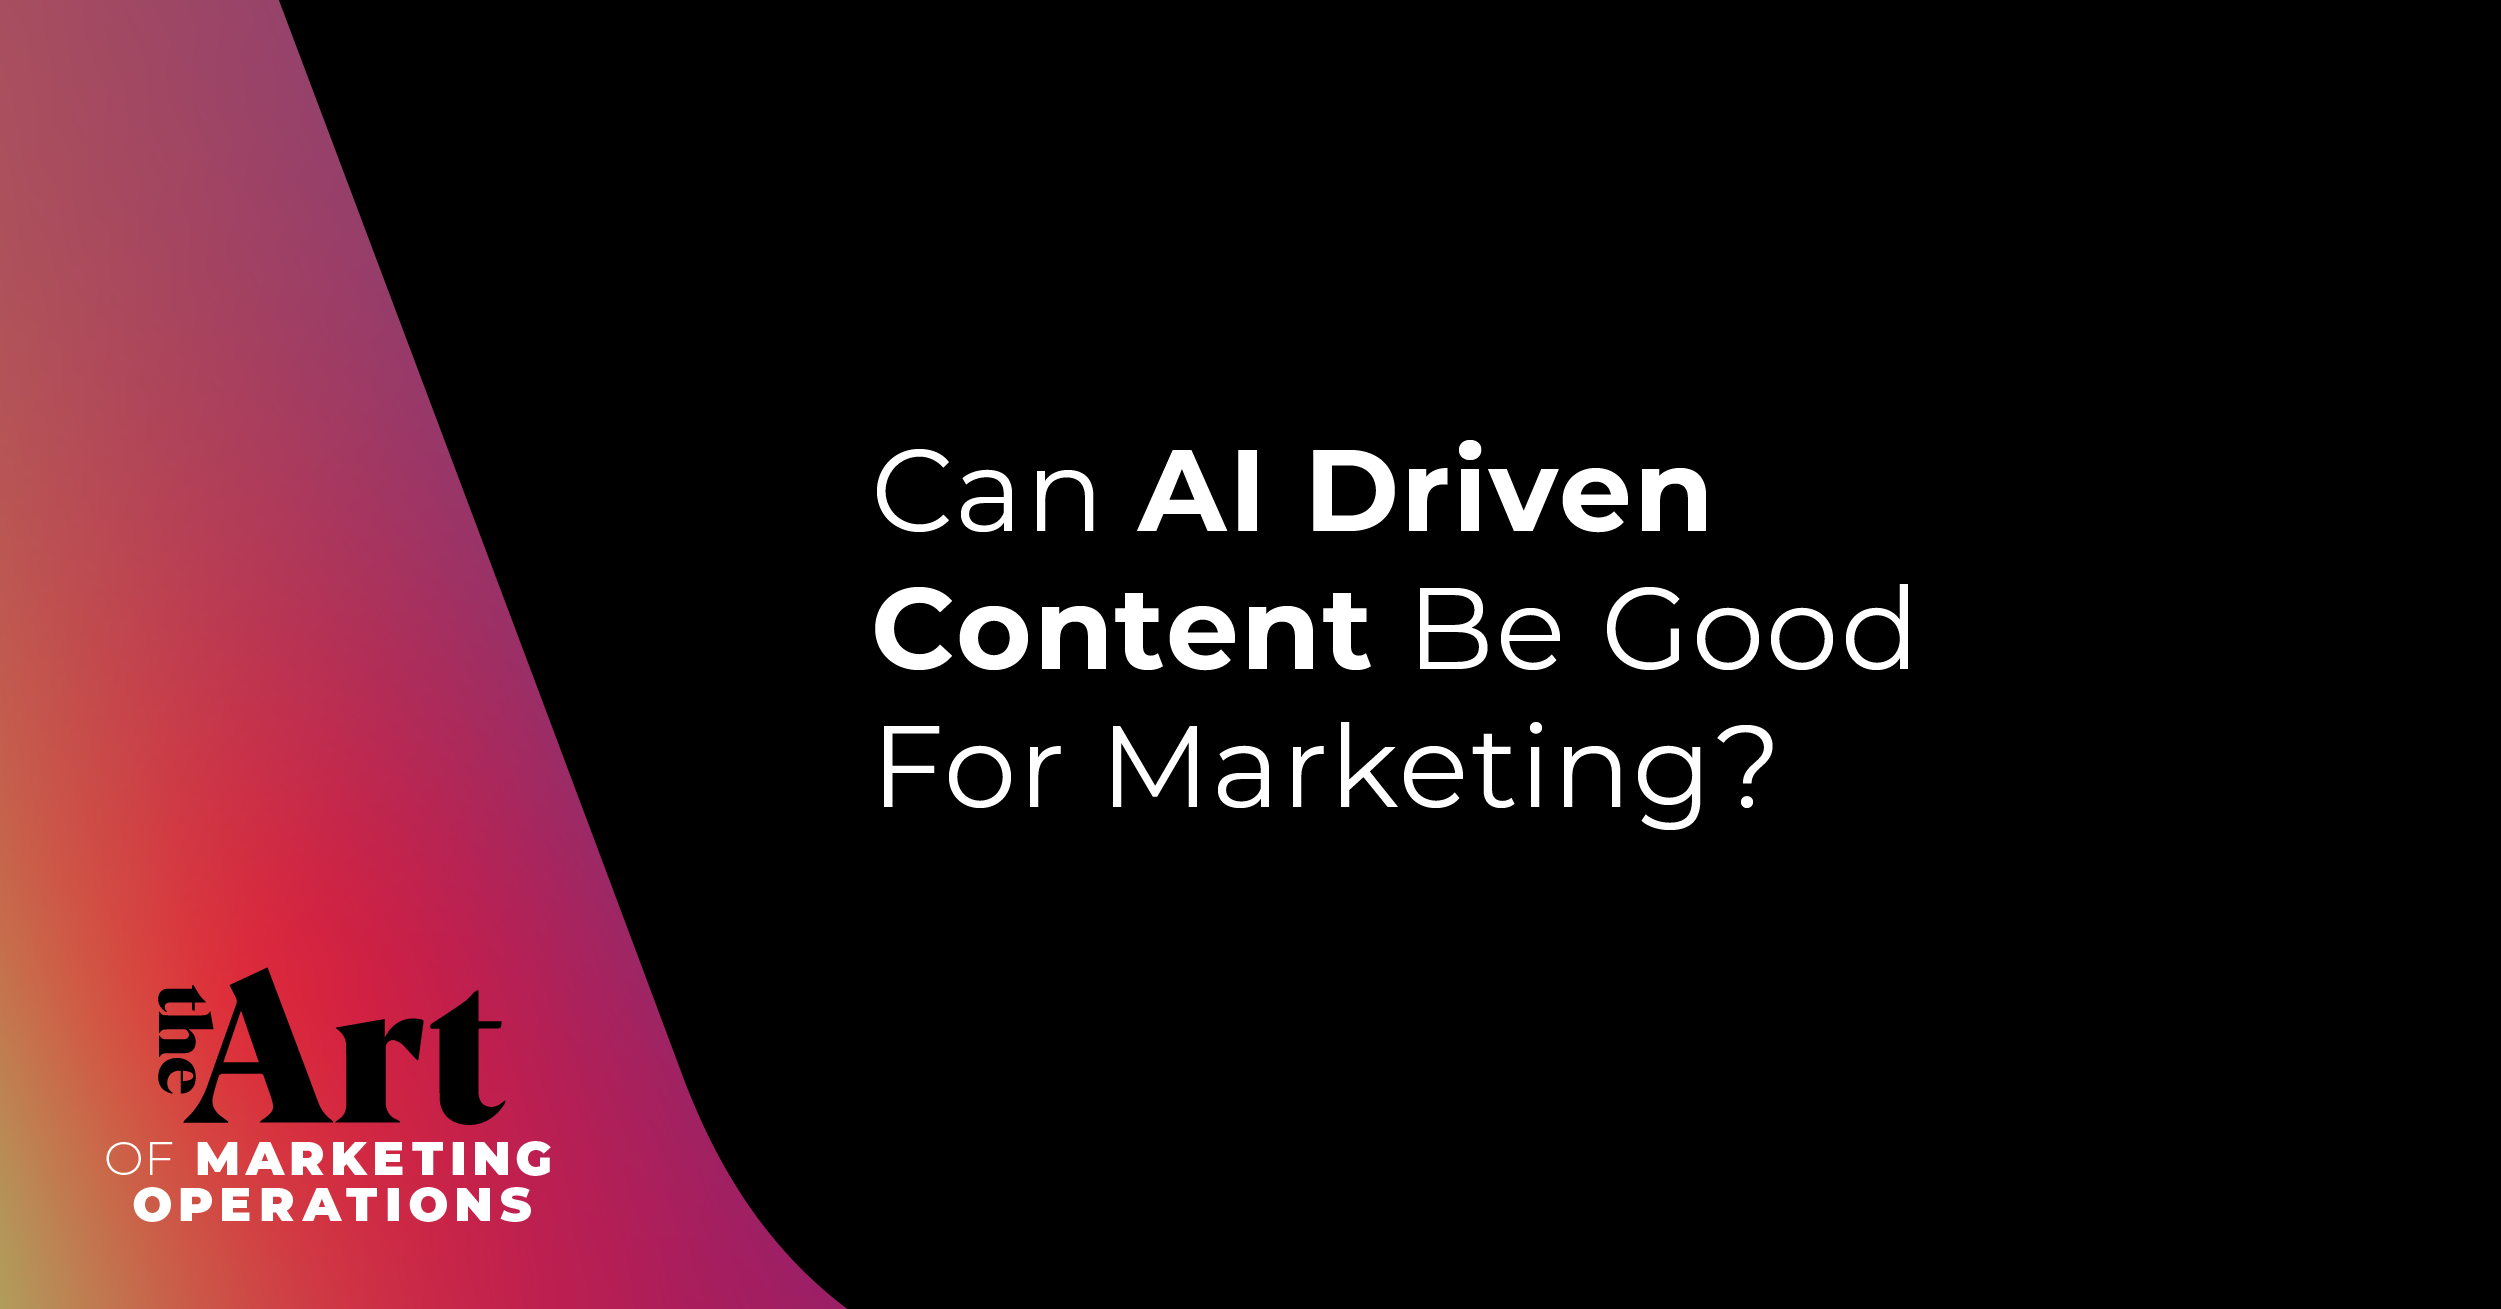 Can AI driven content be good for marketing?